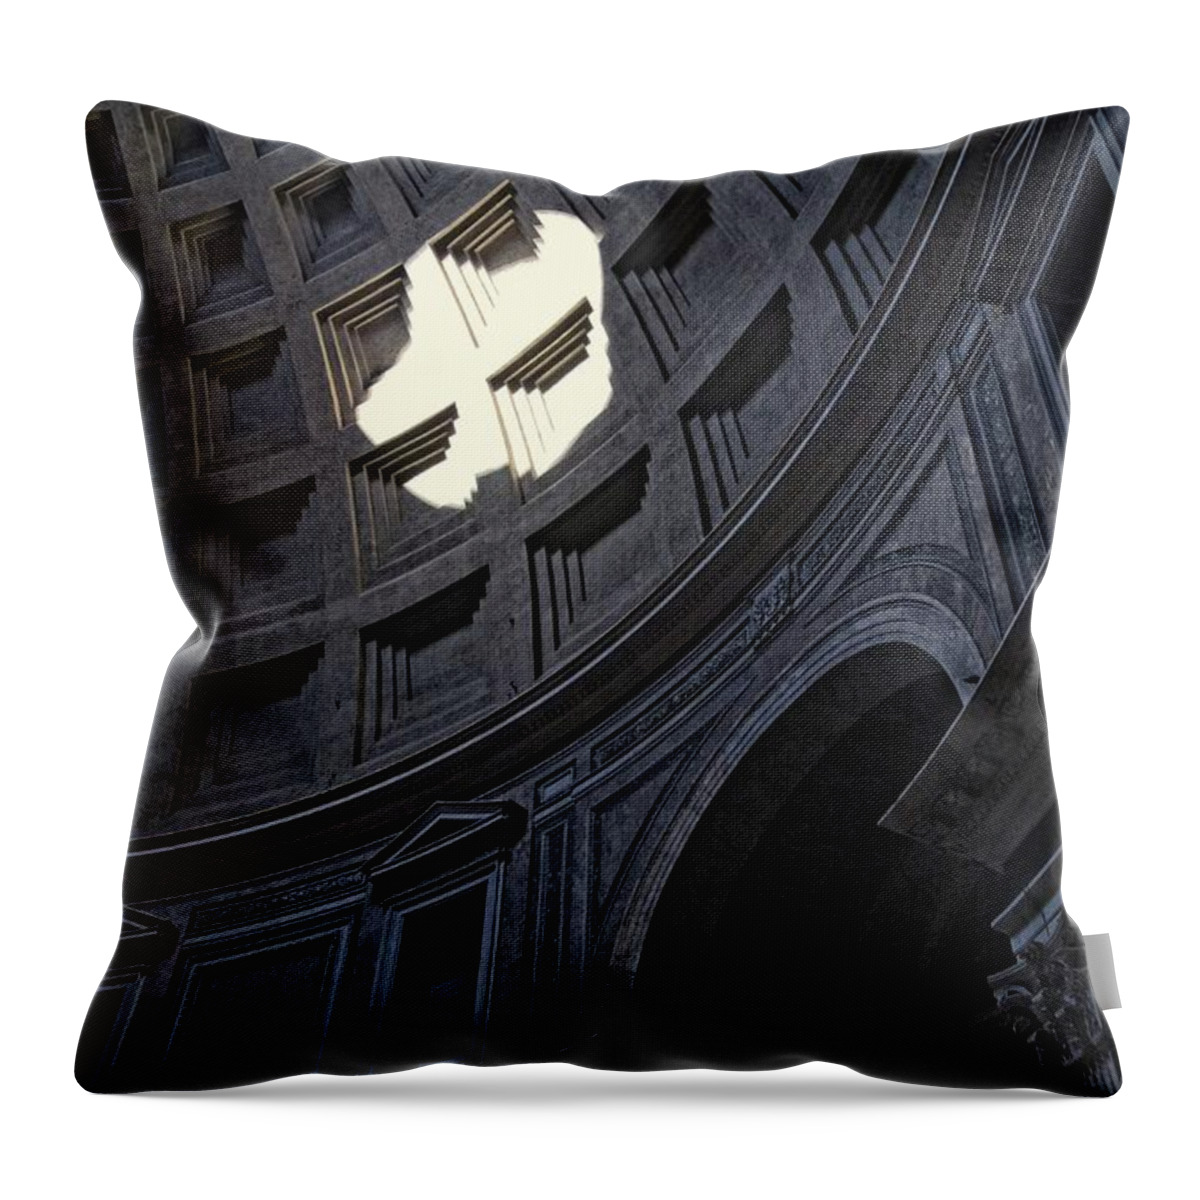 Italy Throw Pillow featuring the photograph Pantheon Abstract III by Allan Van Gasbeck